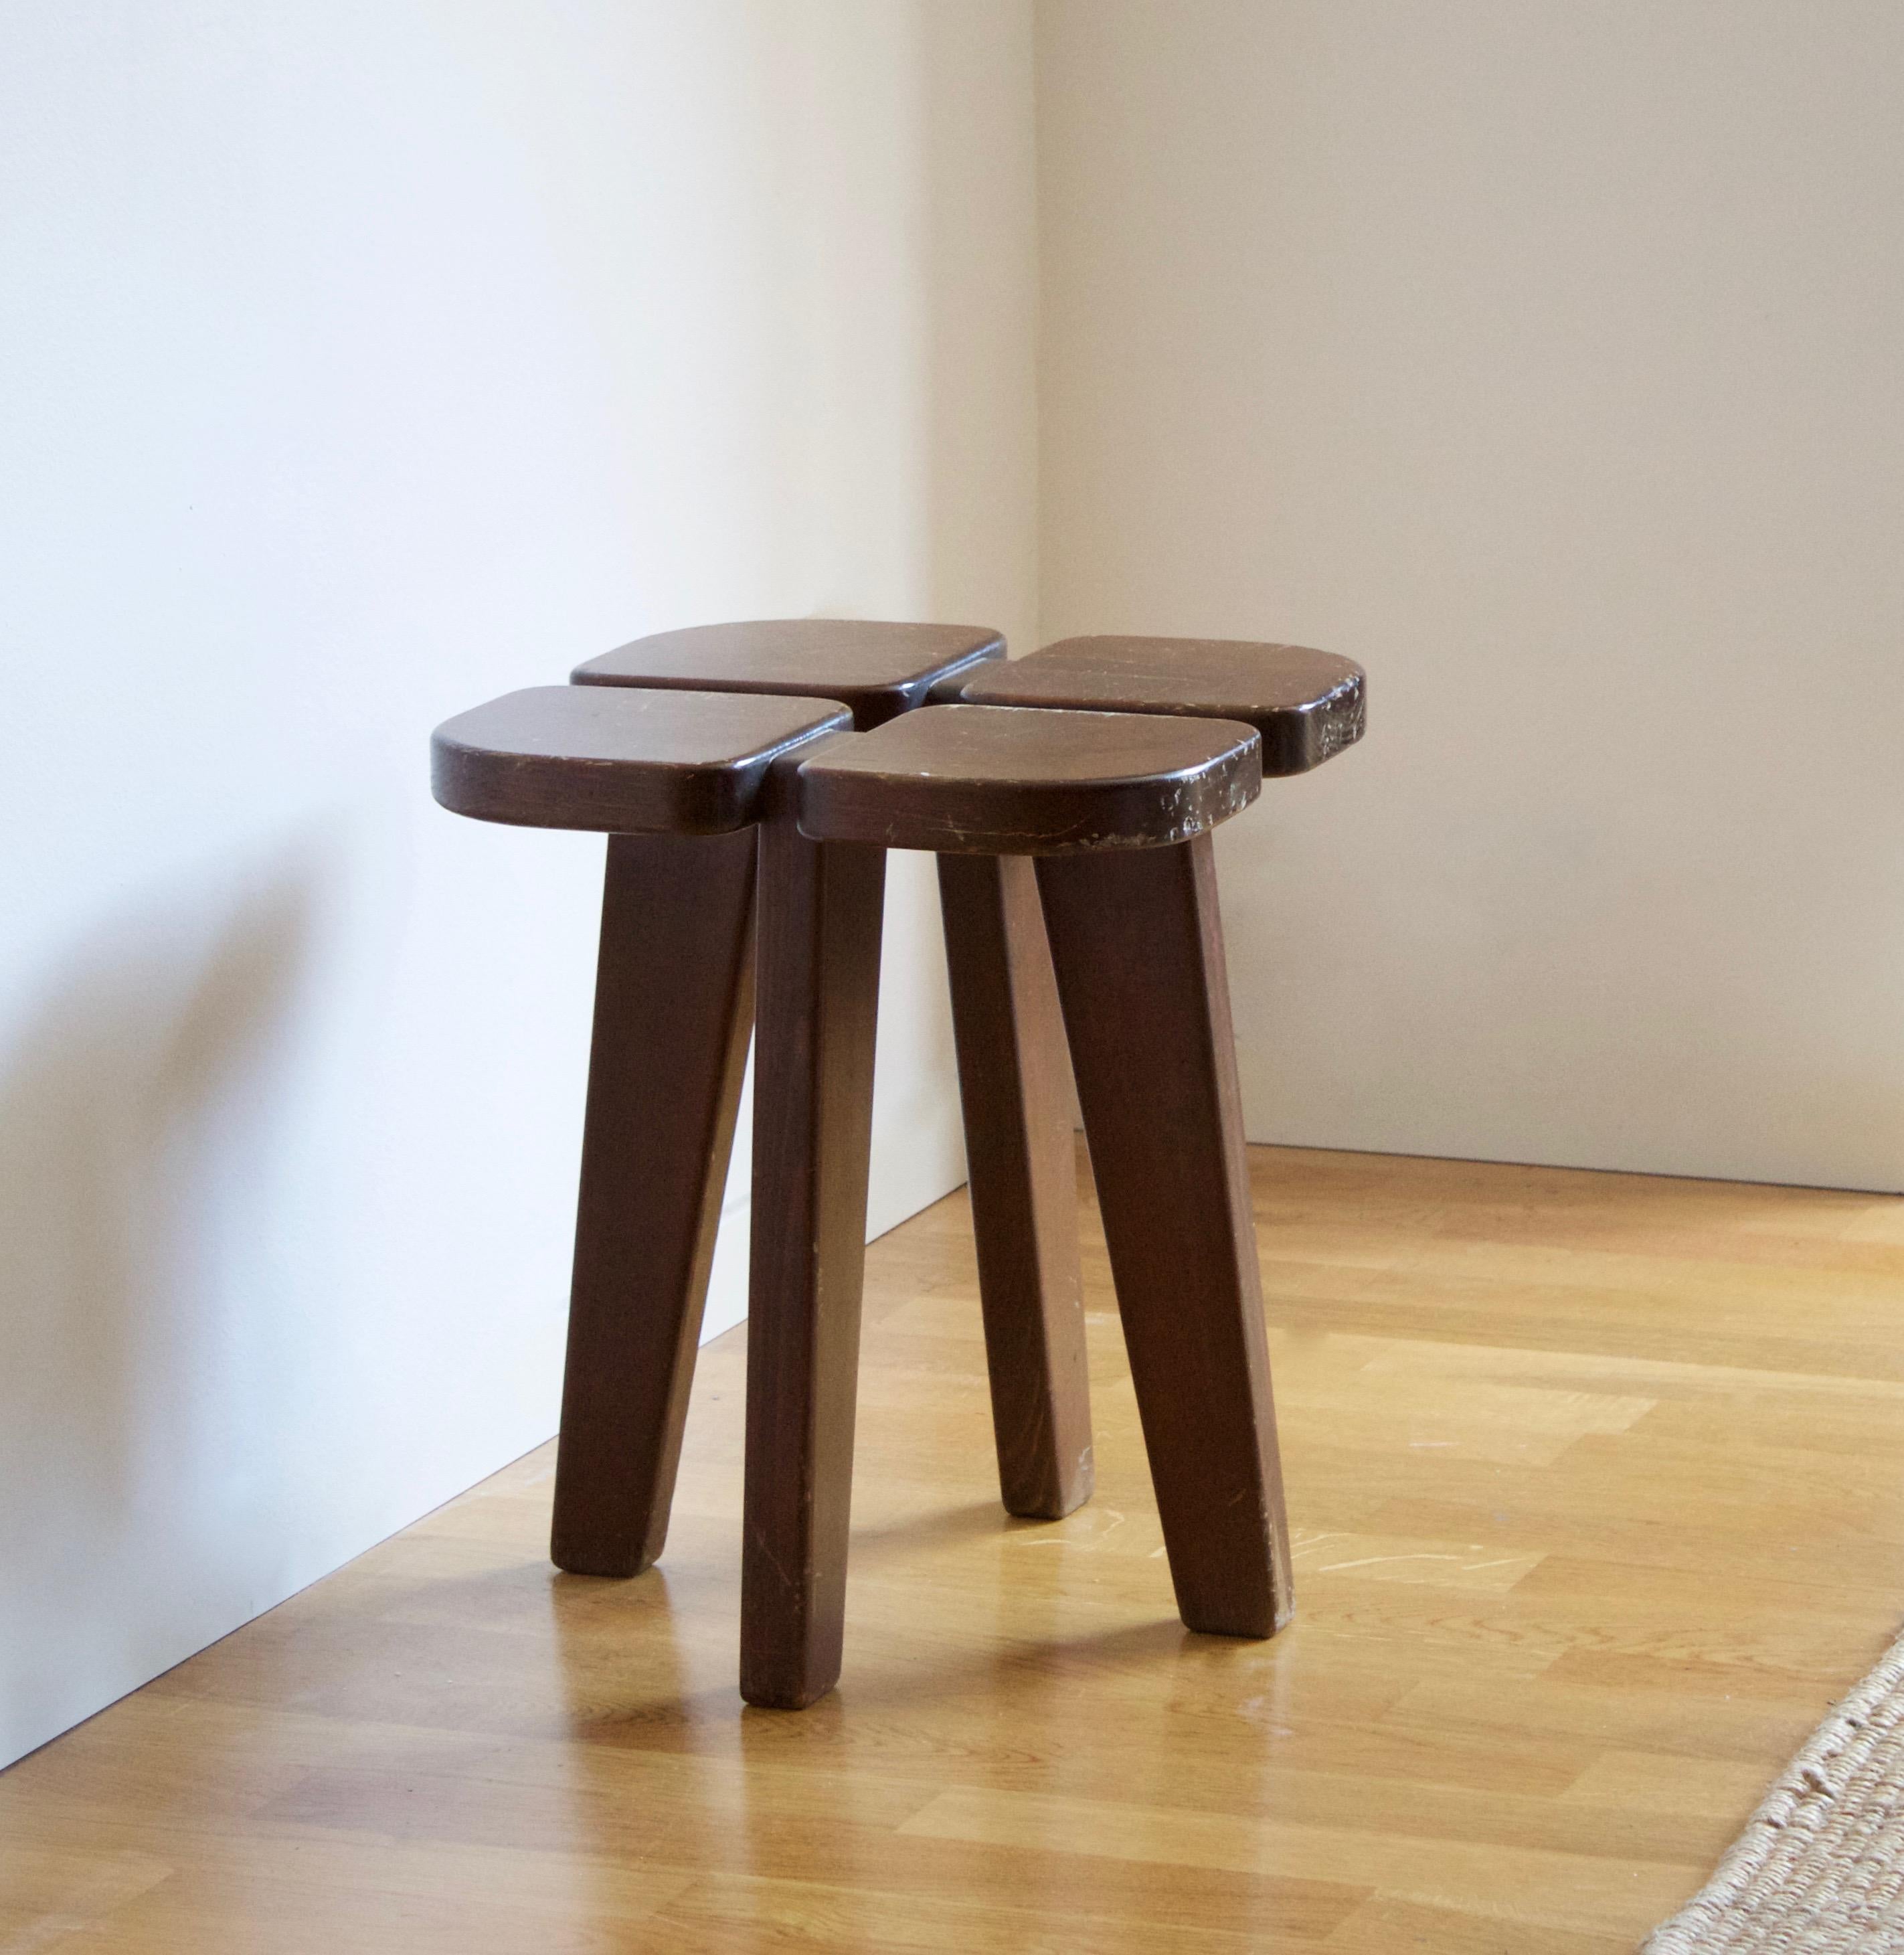 A stool, design attributed to Finnish Lisa Johansson-Pape, produced by Kervo Snickerifabrik for Oy Stockmann Ab, 1970s. In dark-stained pine.

Other designers working in similar functionalist ethos include Pierre Jeanneret, Pierre Chapo, Axel